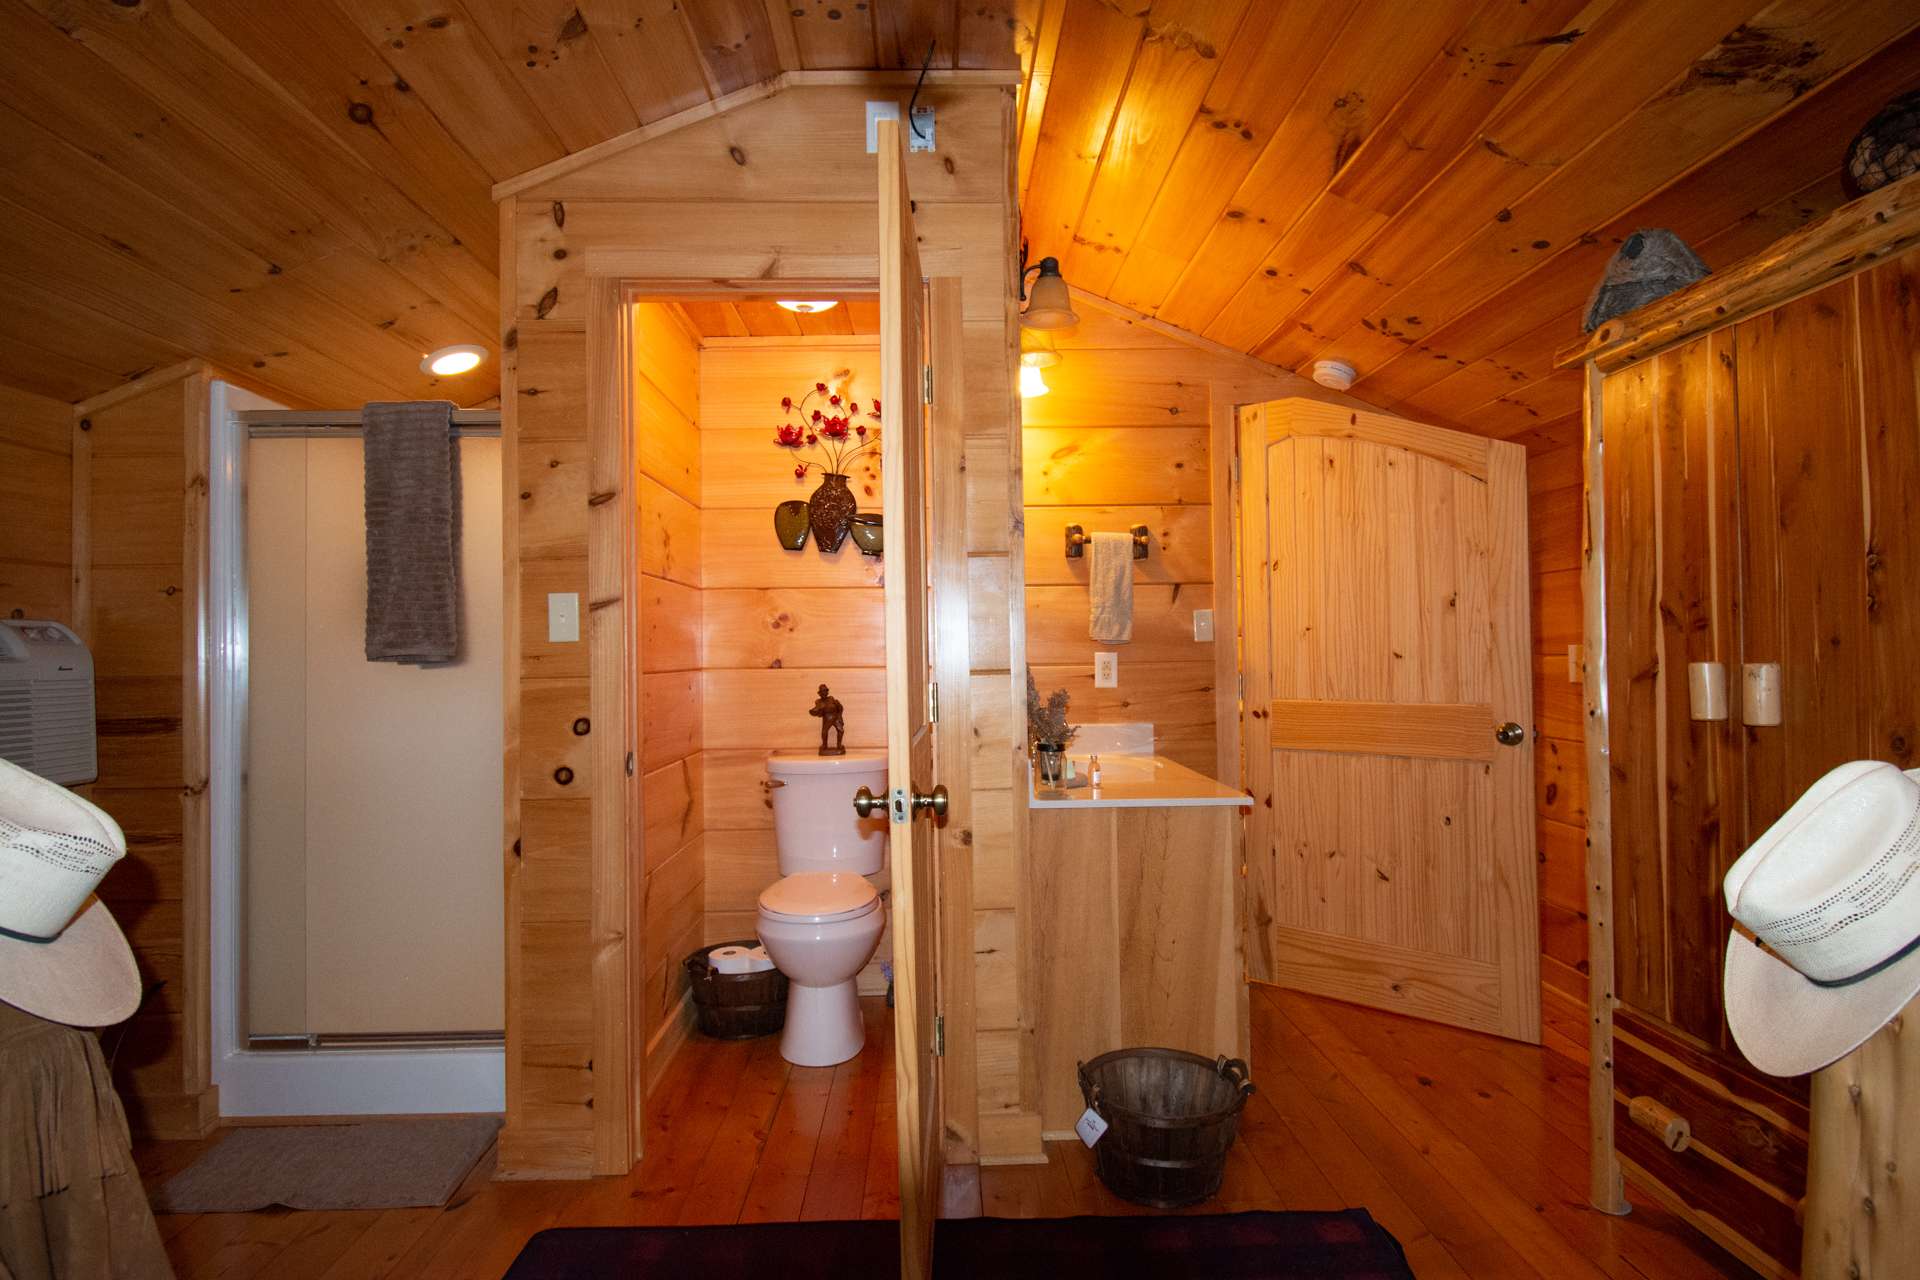 The upper level bedroom also has the vanity, shower and water closet inside the bedroom.